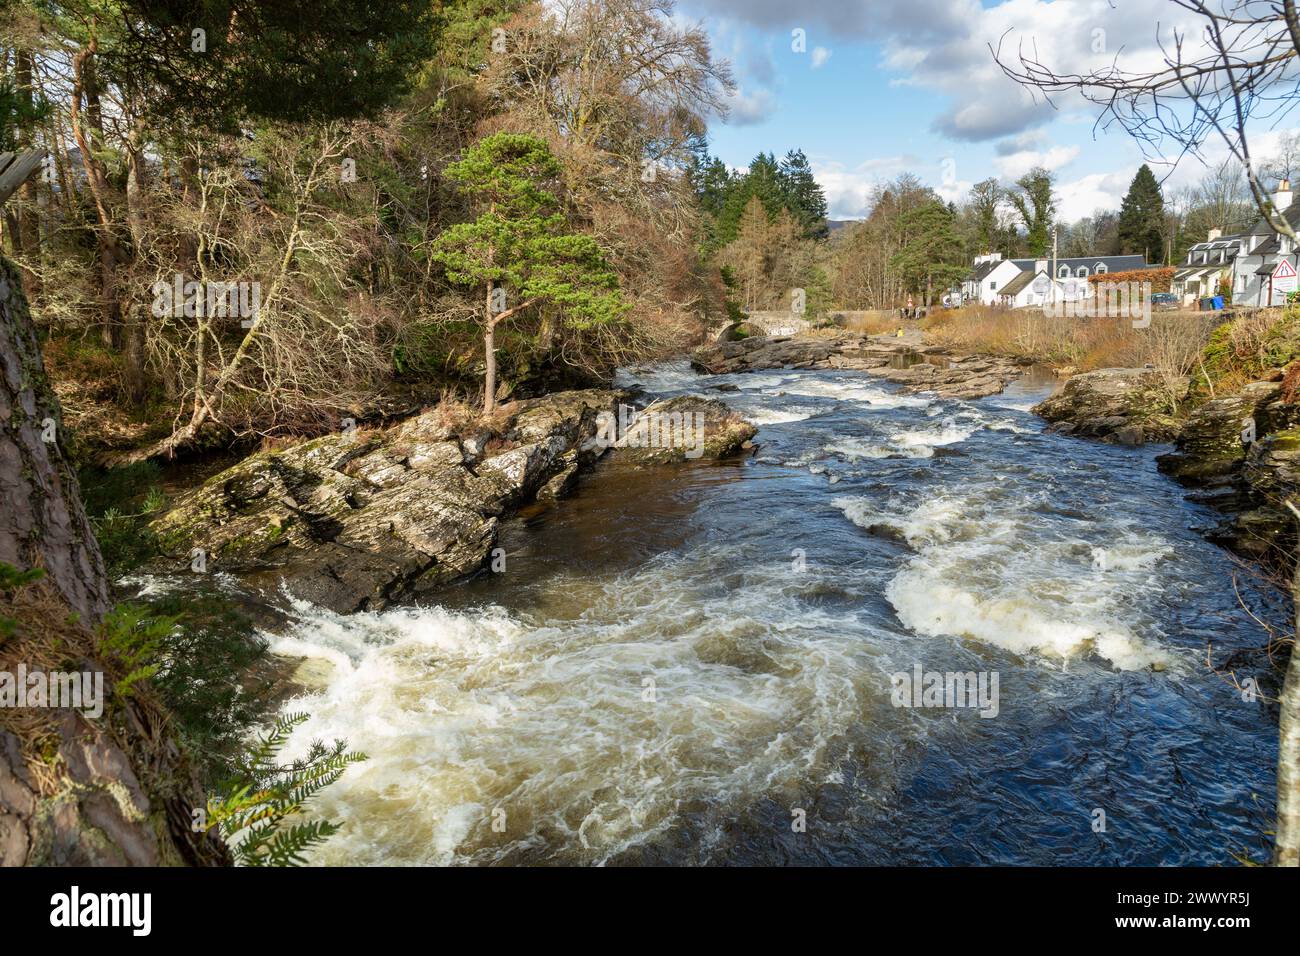 The Falls of Dochart are a cascade of waterfalls situated on the River Dochart at Killin in Perthshire, Scotland Stock Photo